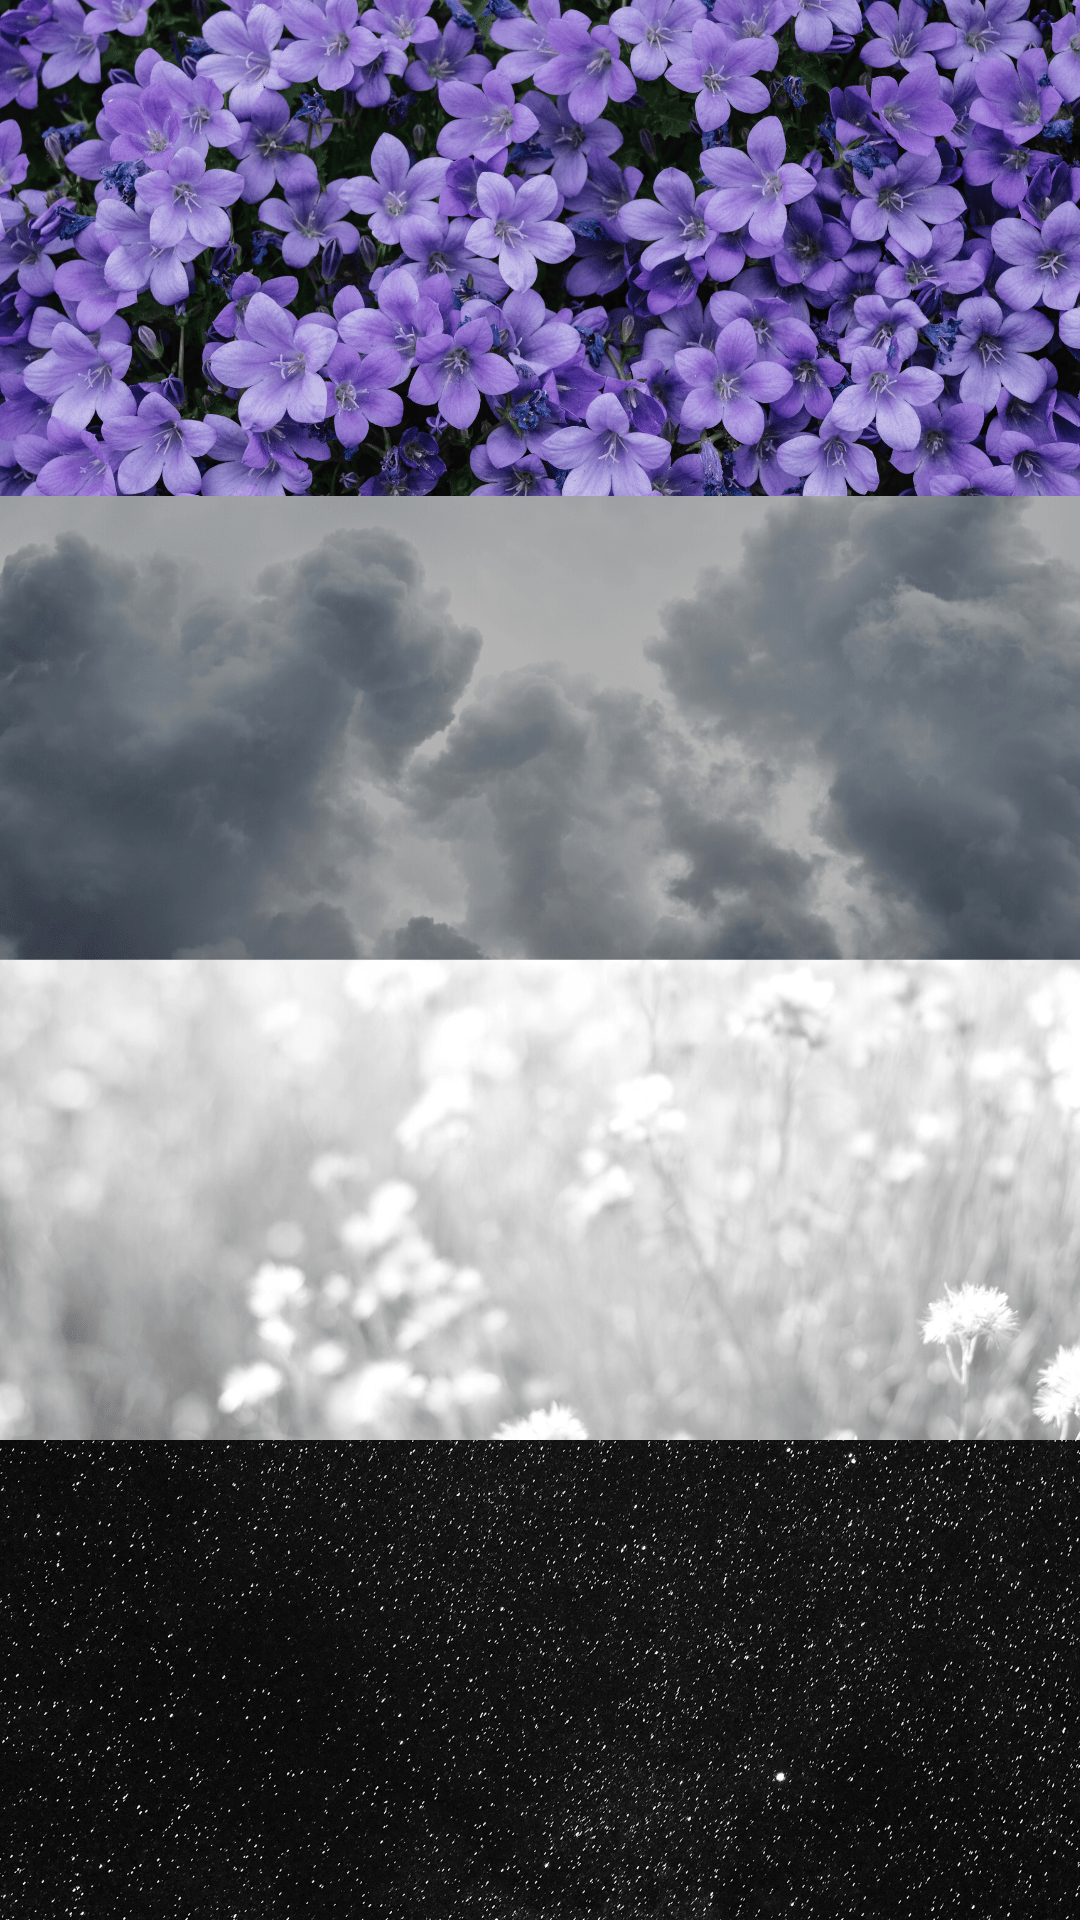 A collage of images including purple flowers, clouds, and stars. - Asexual